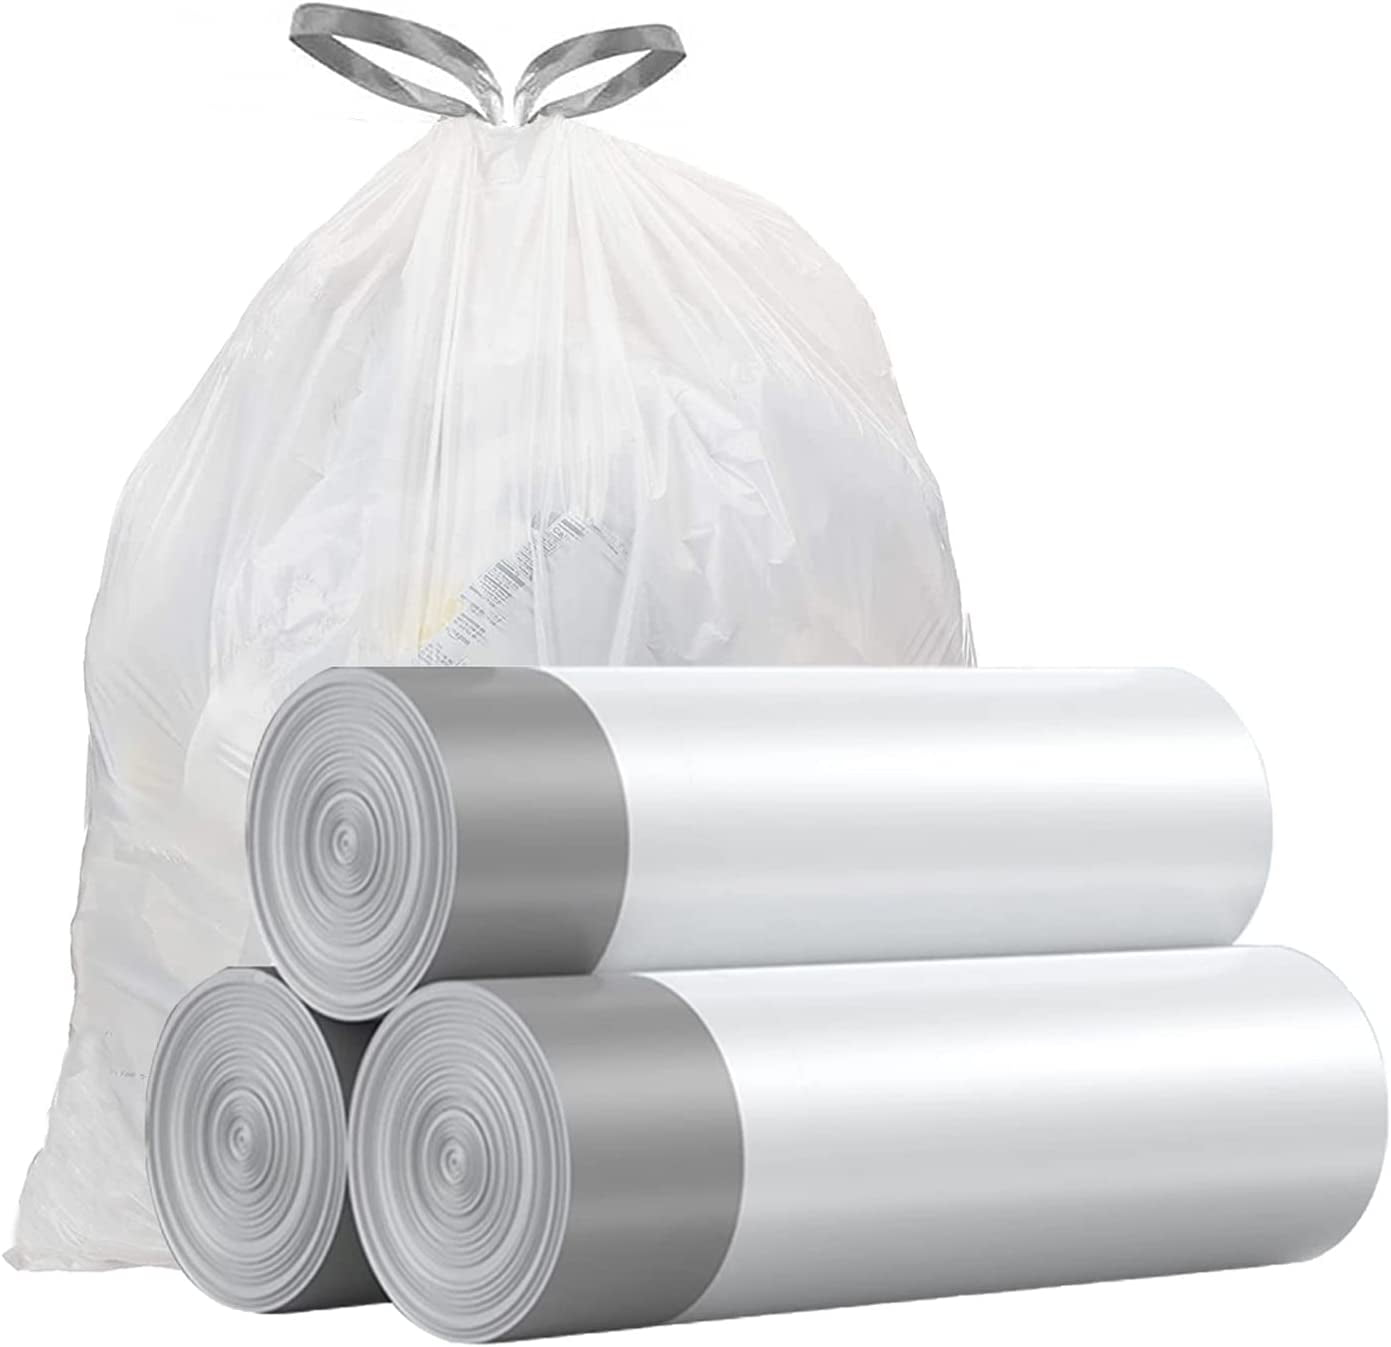 CHARMOUNT 4 Gallon Trash Bag - Unscented 4 Gallon Garbage Bags for  Bathroom, Kitchen, Bedroom, 105 Count (15 Liter) …